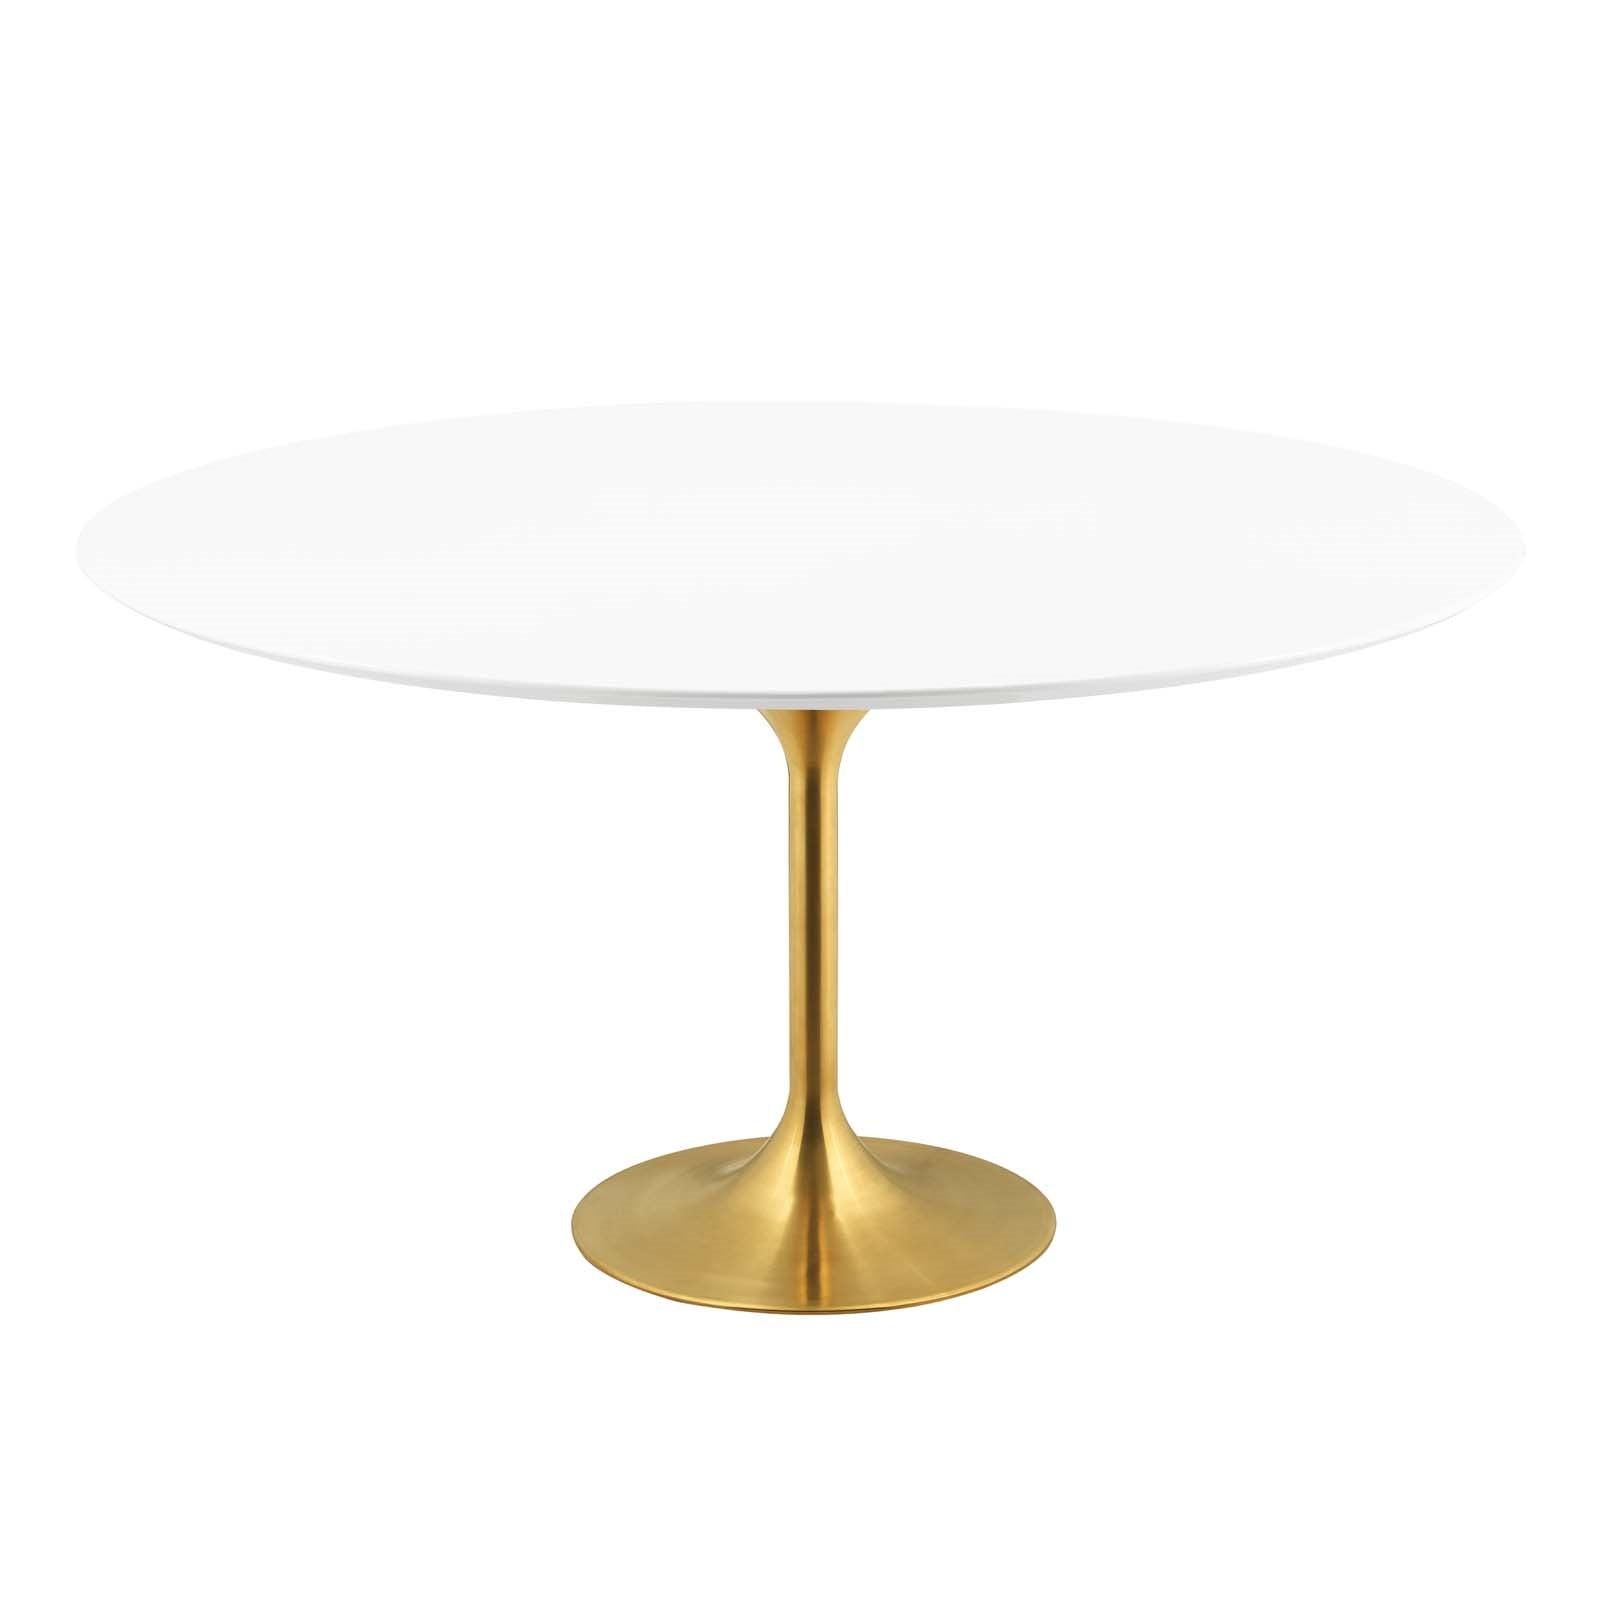 Lola 60" Round Wood Dining Table in Gold White - Euro Living Furniture